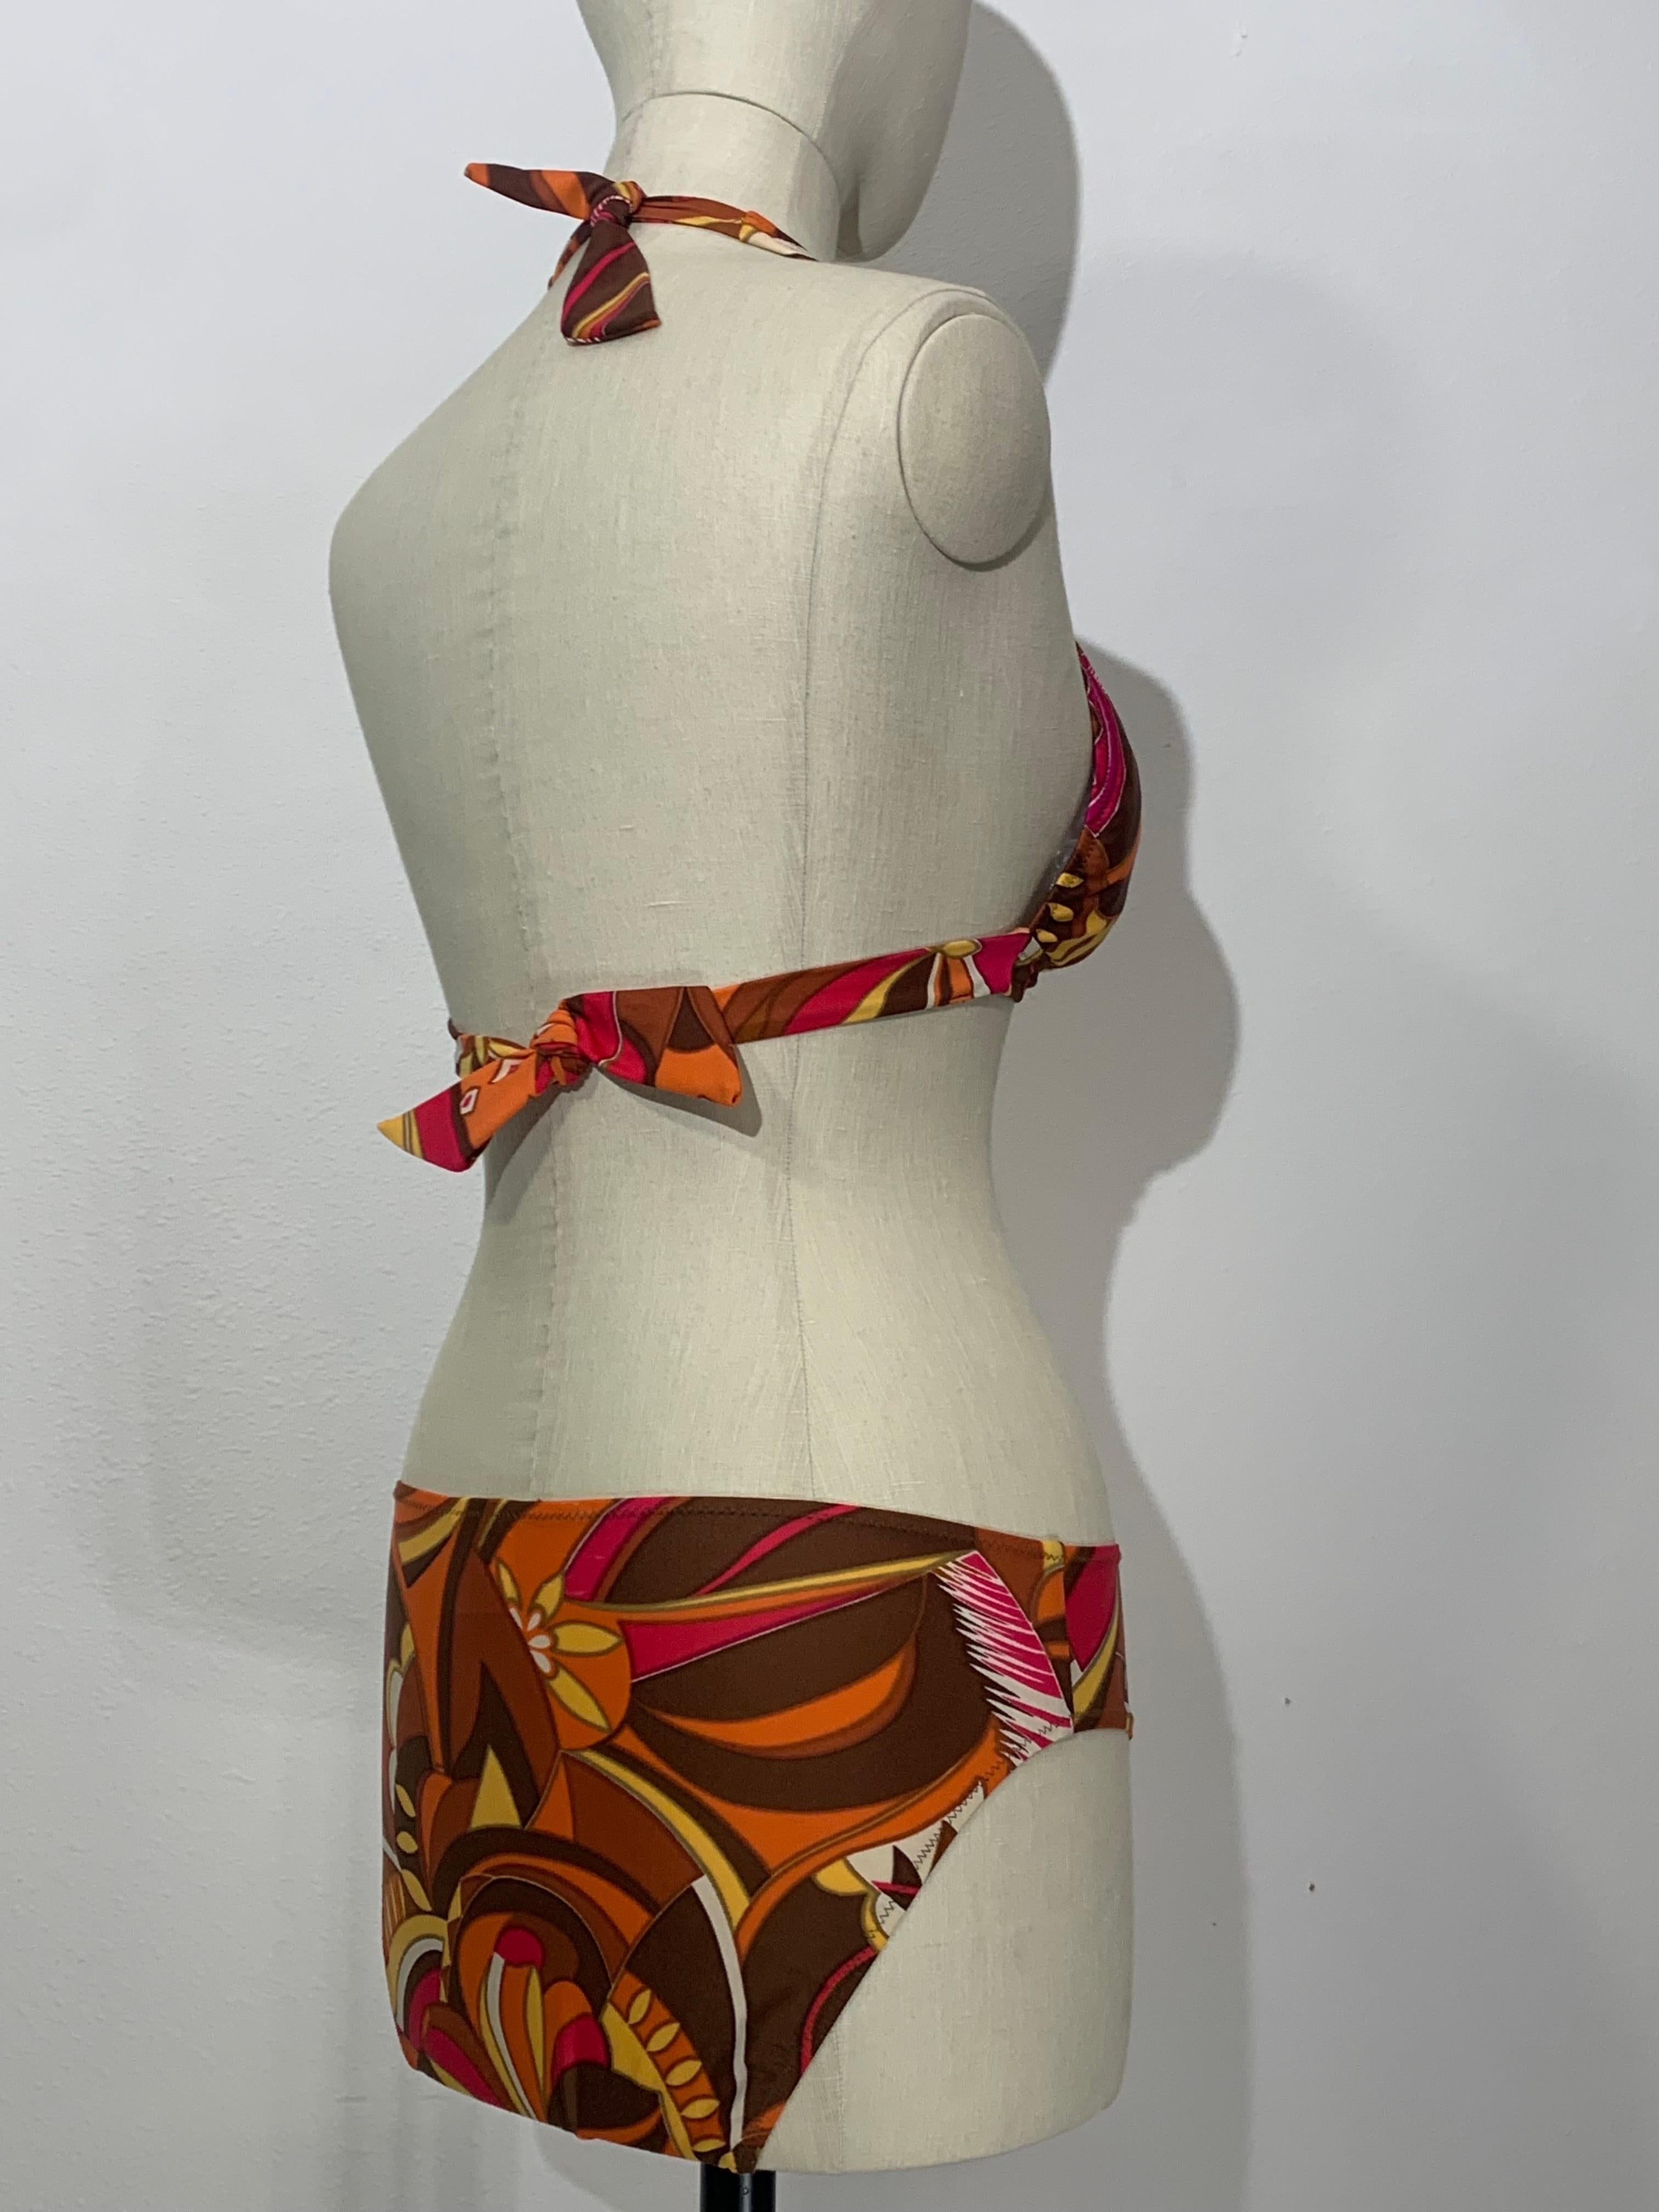 1970s Gottex Stylized Floral 2-Piece Bikini Swimsuit in Brown Copper and Orange For Sale 6